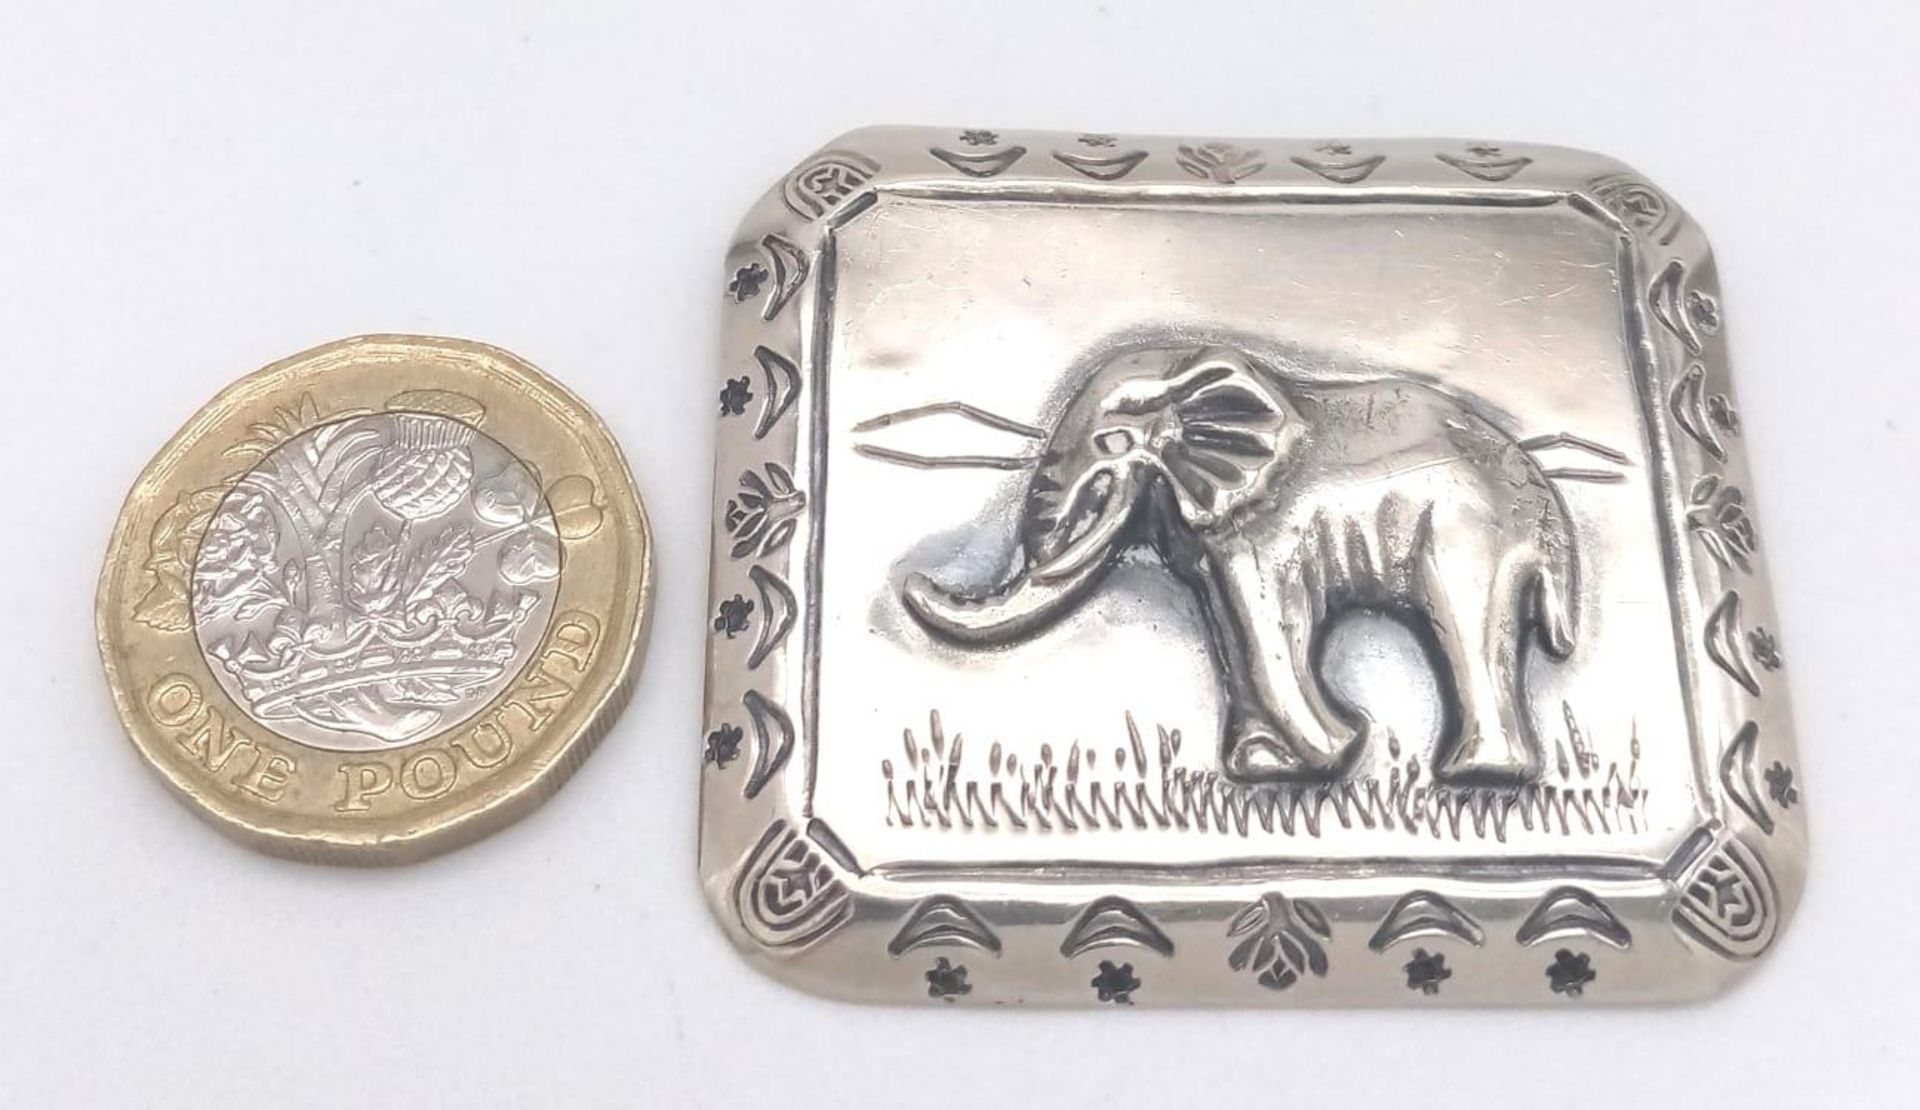 A Vintage South African Sterling Silver Elephant Relief Detailed Brooch. Circa 1950’s by Haglund. - Image 4 of 6